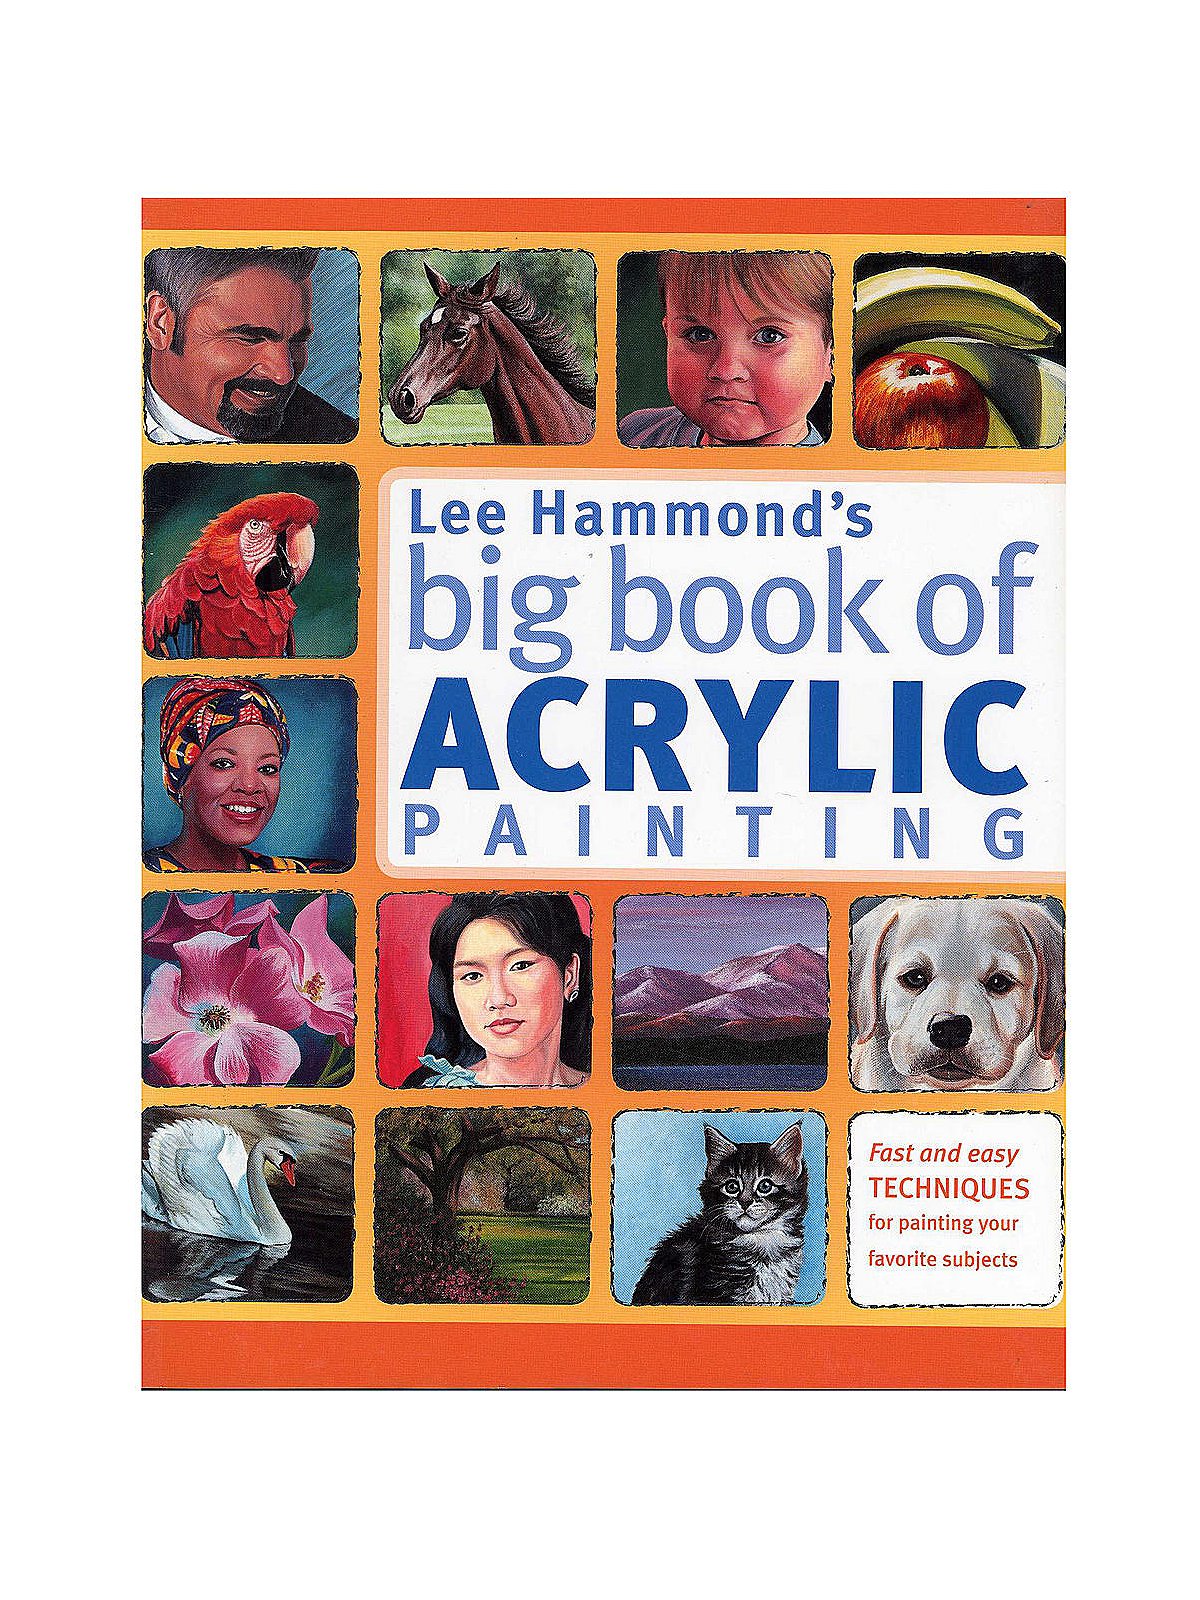 Paint Landscapes in Acrylic with Lee Hammond by Lee Hammond: 9781600613098